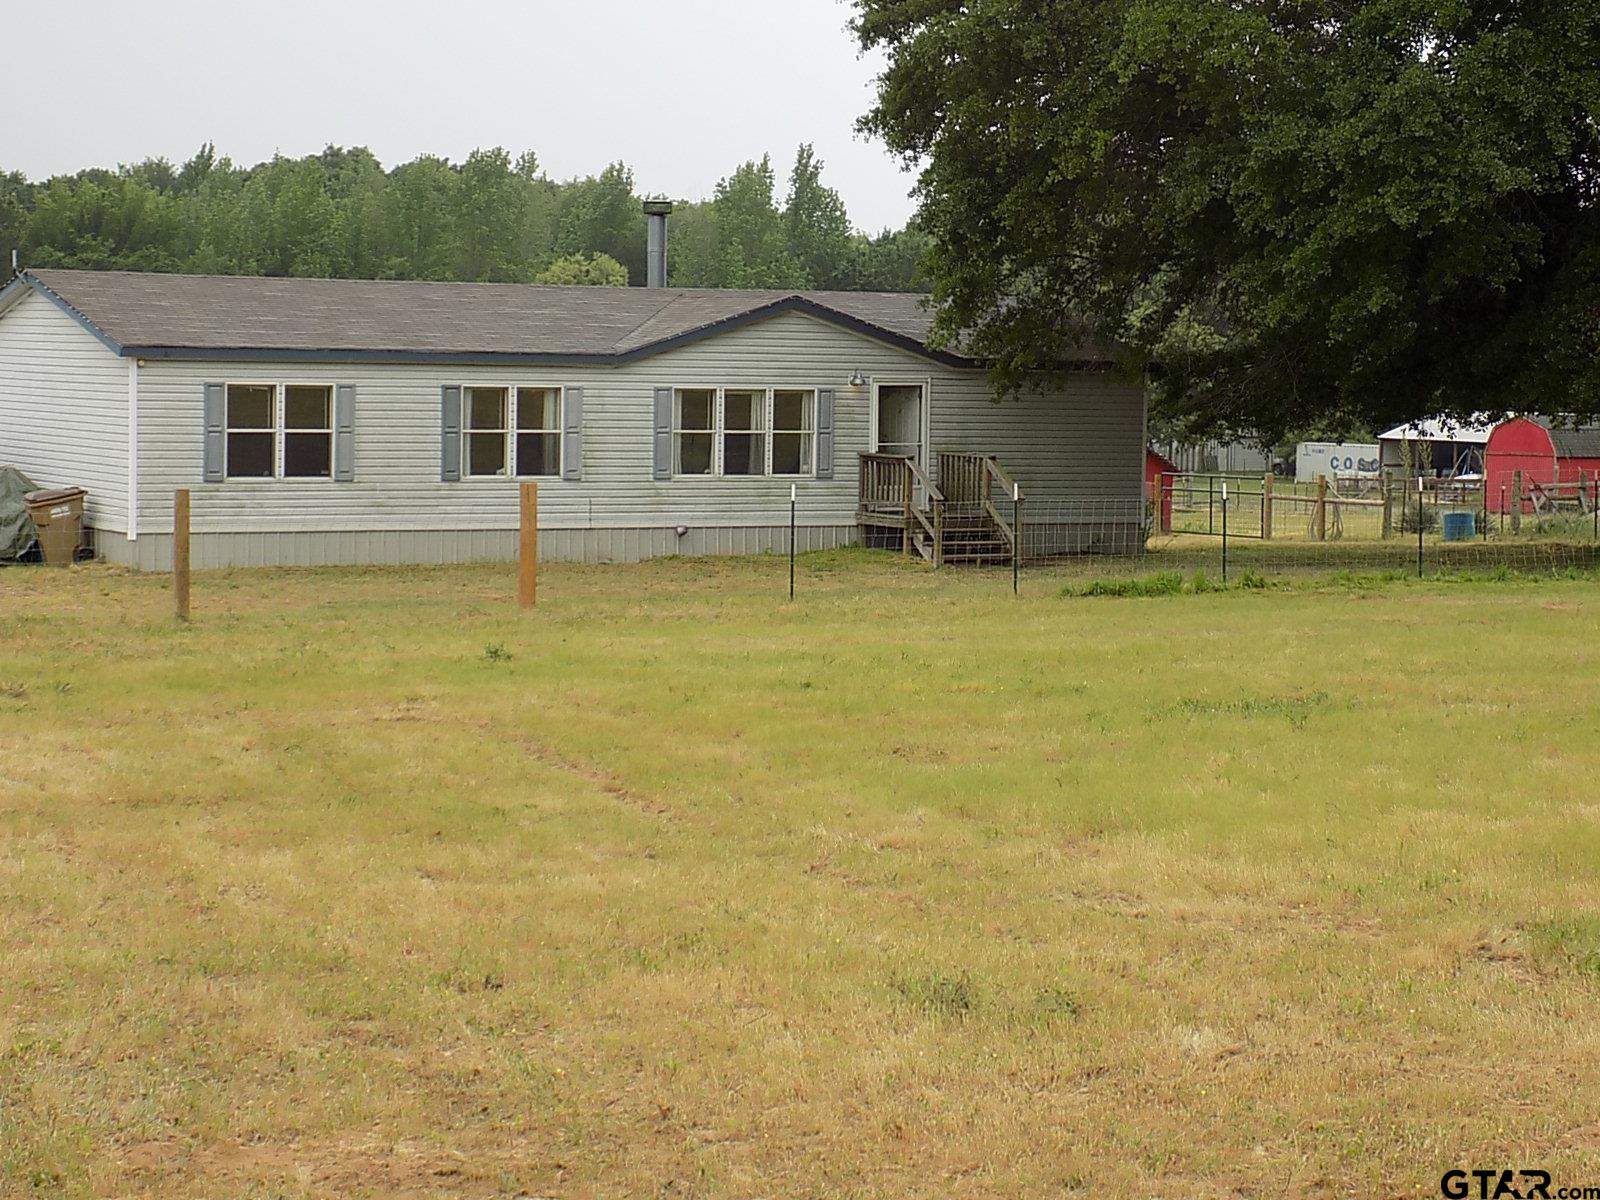 2912 FM 49, Mineola, Texas 75773, 3 Bedrooms Bedrooms, ,2 BathroomsBathrooms,Manufactured(mobile) Home,For Sale,FM 49,24005115